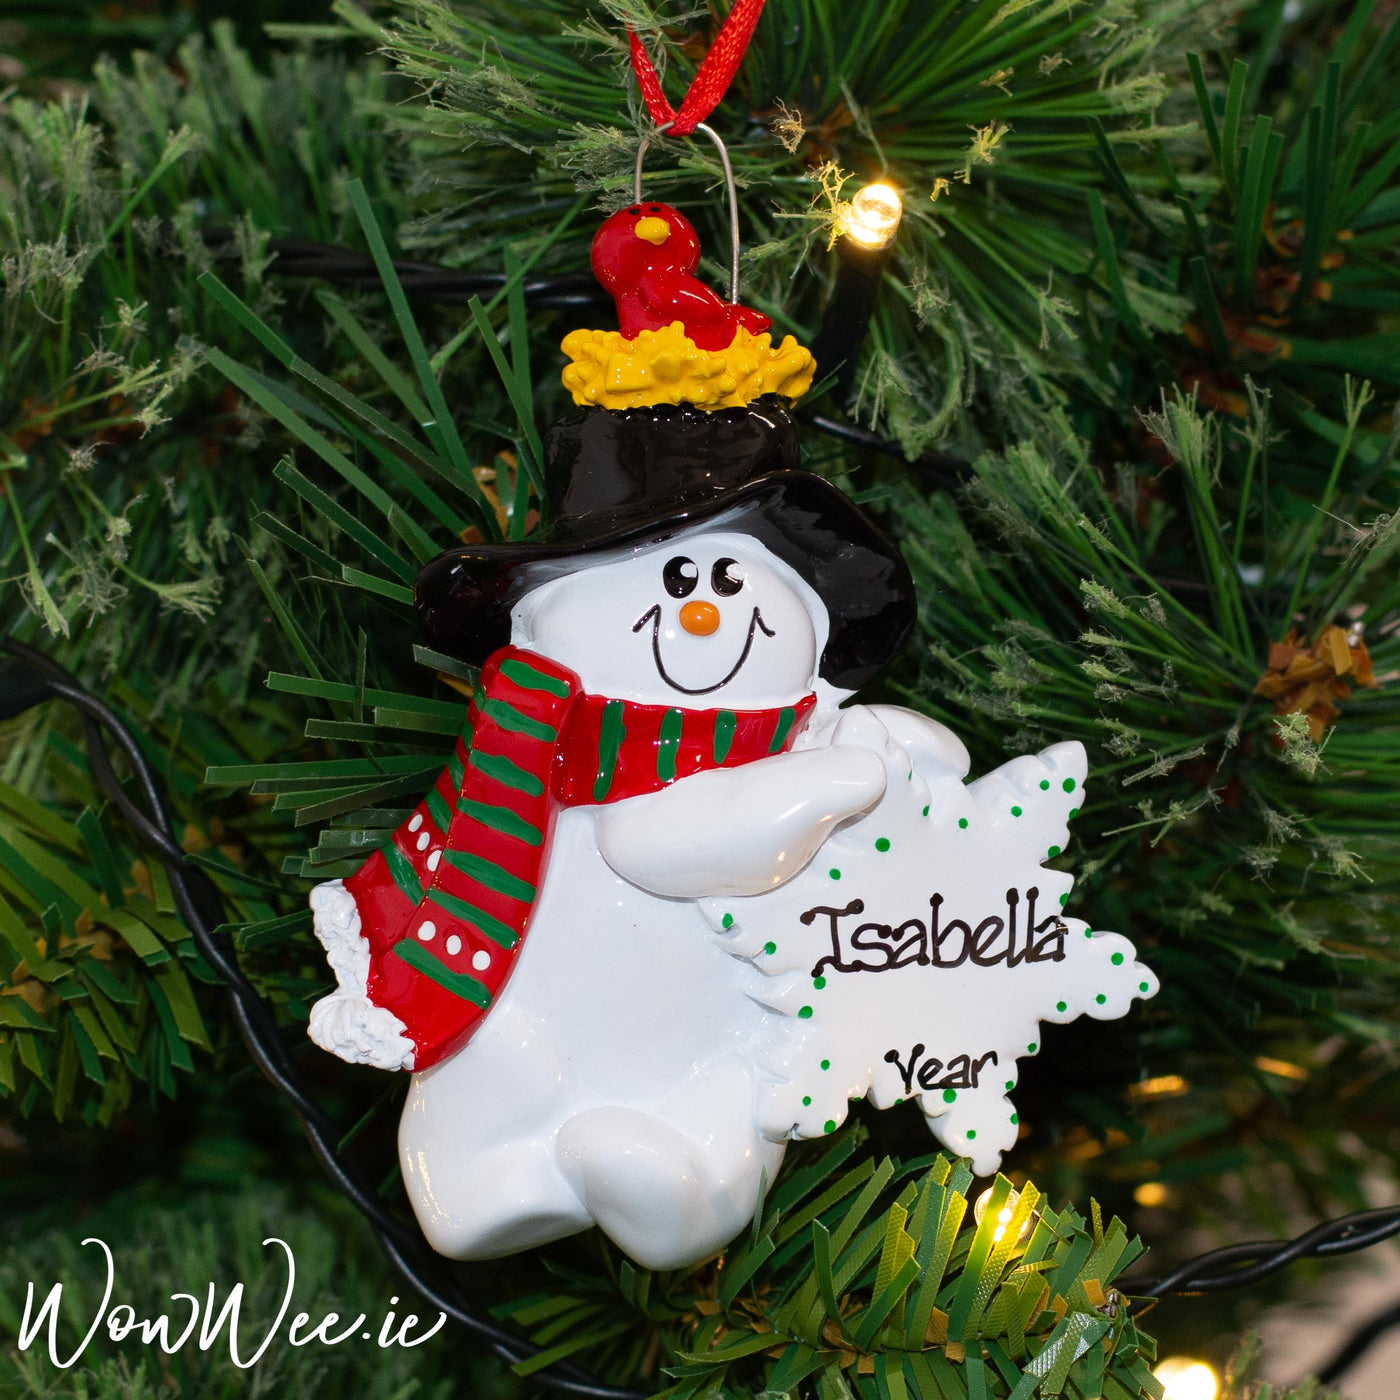 Personalised Christmas Tree Decoration for a special little child to cherish as a special Christmas memory and tradition 